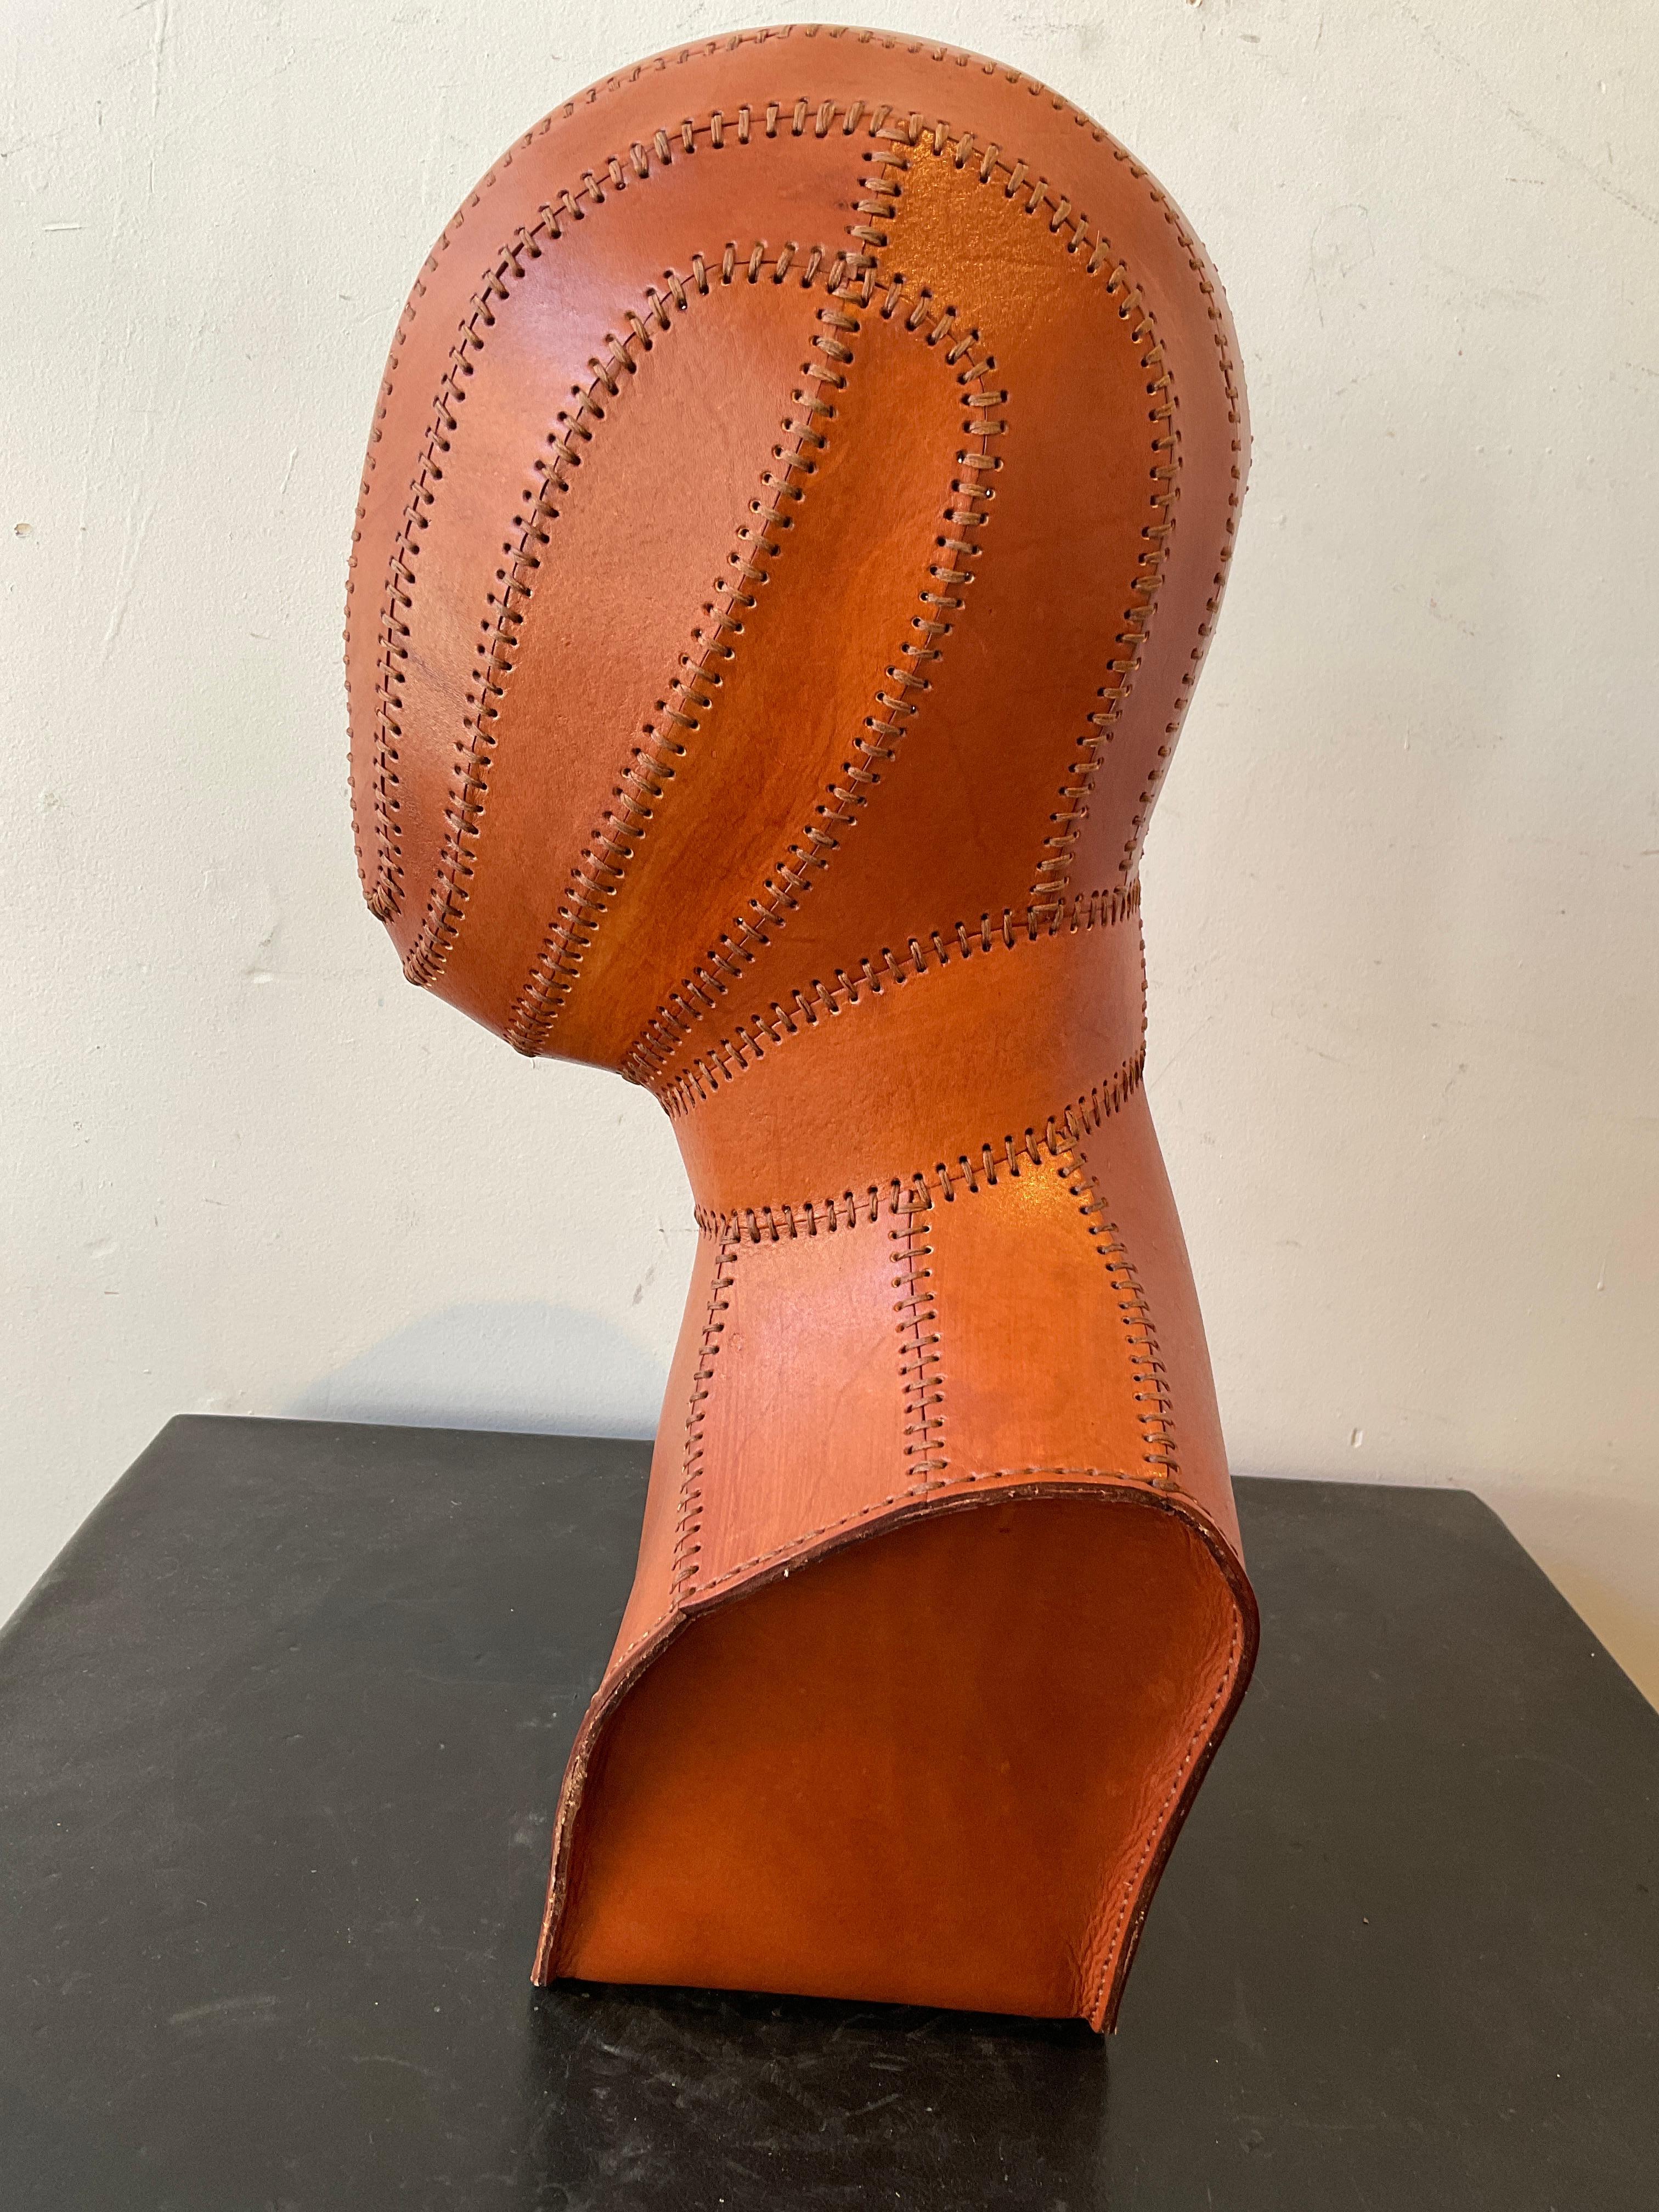 Contemporary Leather Bust Of Man For Sale